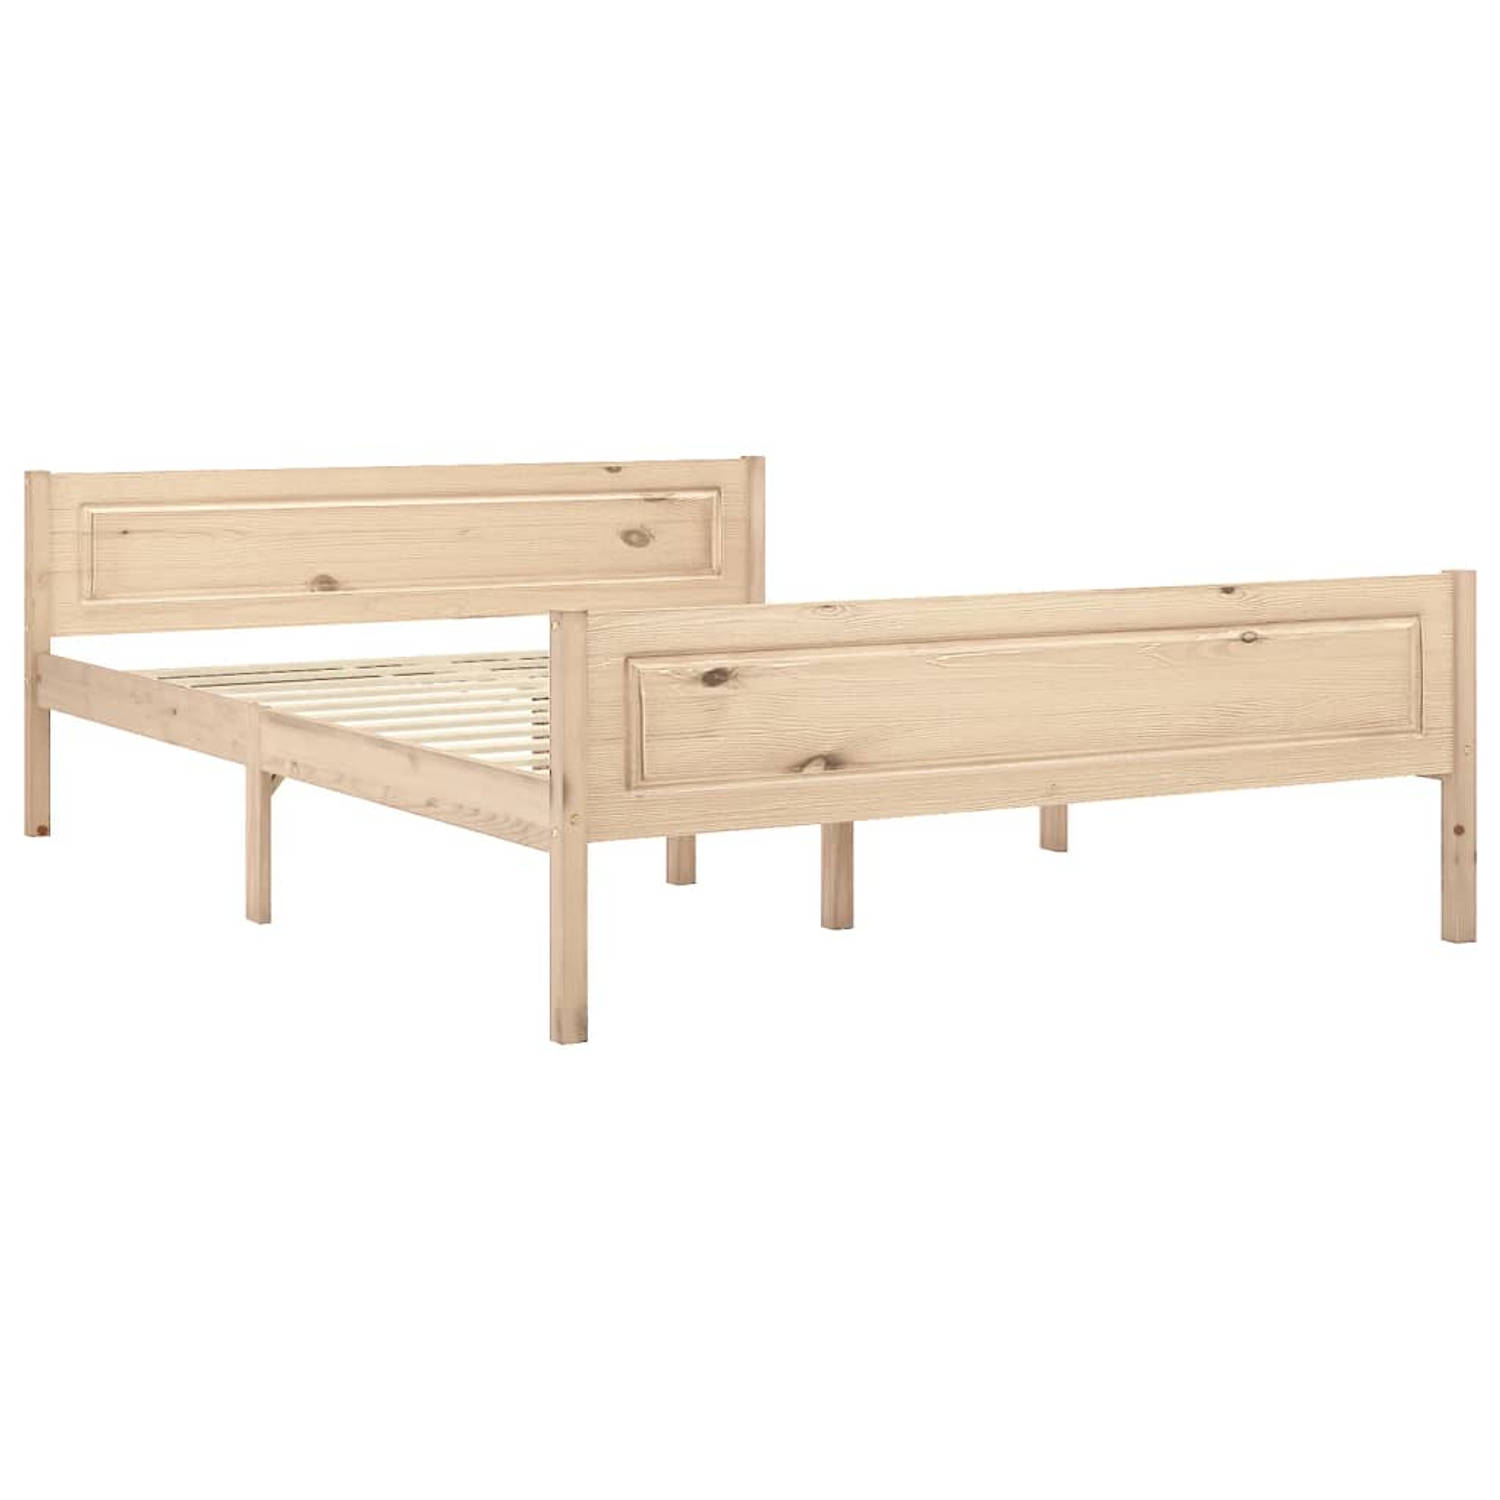 The Living Store Bedframe massief grenenhout 140x200 cm - Bedframe - Bedframe - Bed Frame - Bed Frames - Bed - Bedden - 2-persoonsbed - 2-persoonsbedden - Tweepersoons Bed